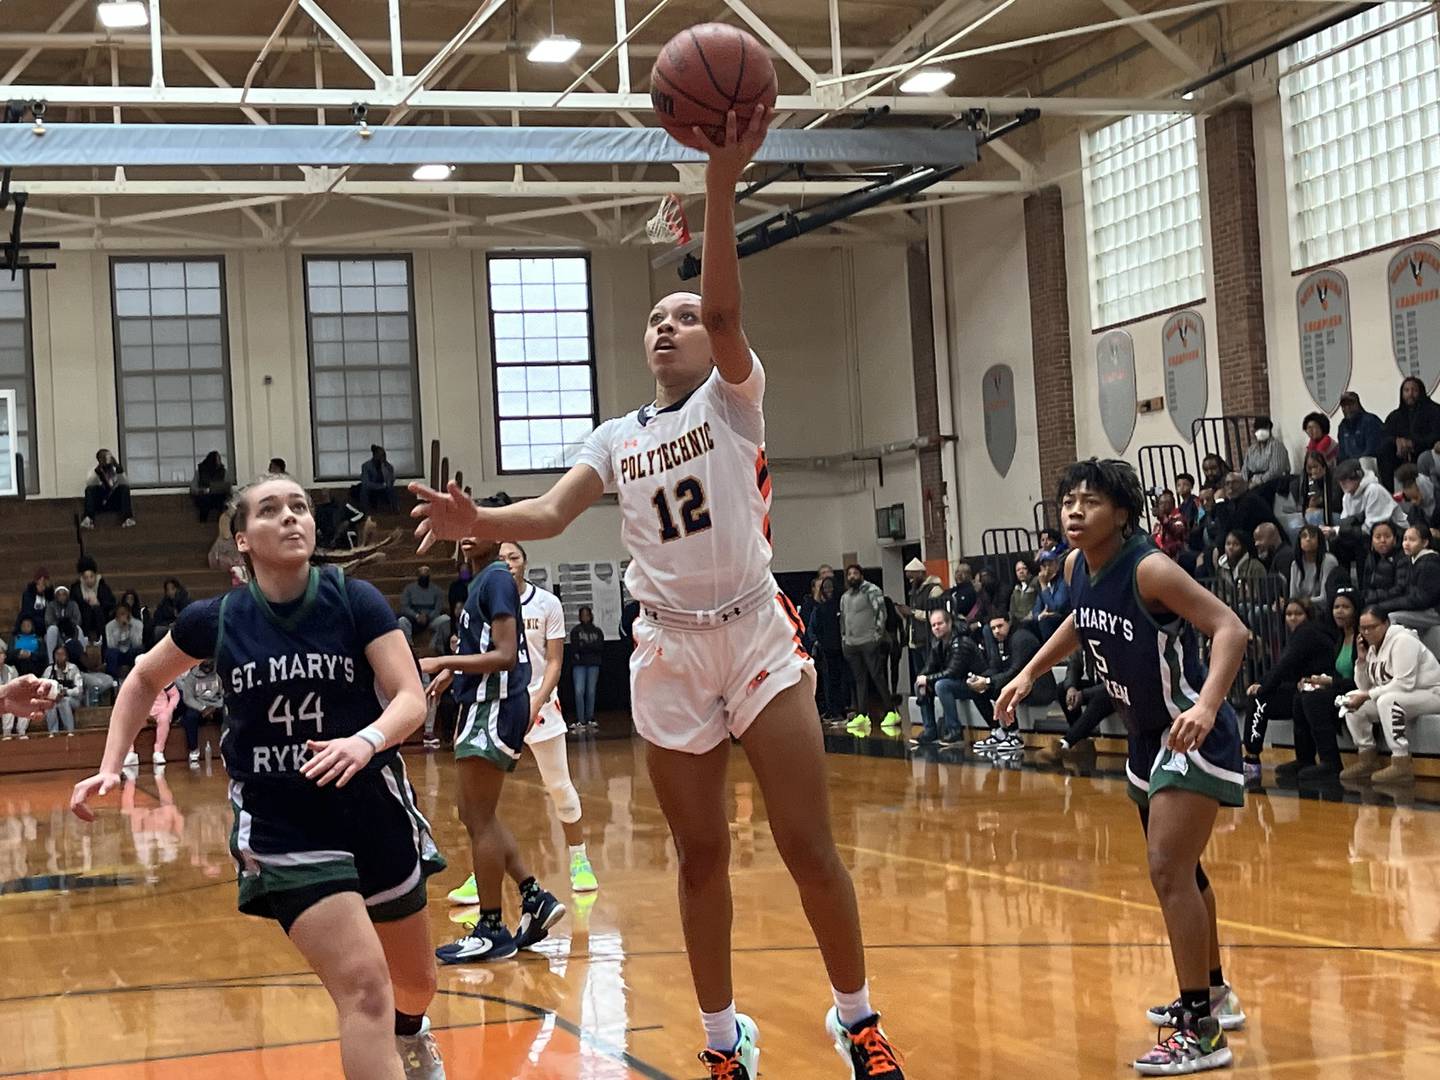 Poly's Mickelle Lowery goes up for two points during Saturday's girls basketball match with St. Mary's Ryken at the Public vs. Private Challenge. The top-ranked Engineers defeated St. Mary's Ryken at the annual mixer at McDonogh.